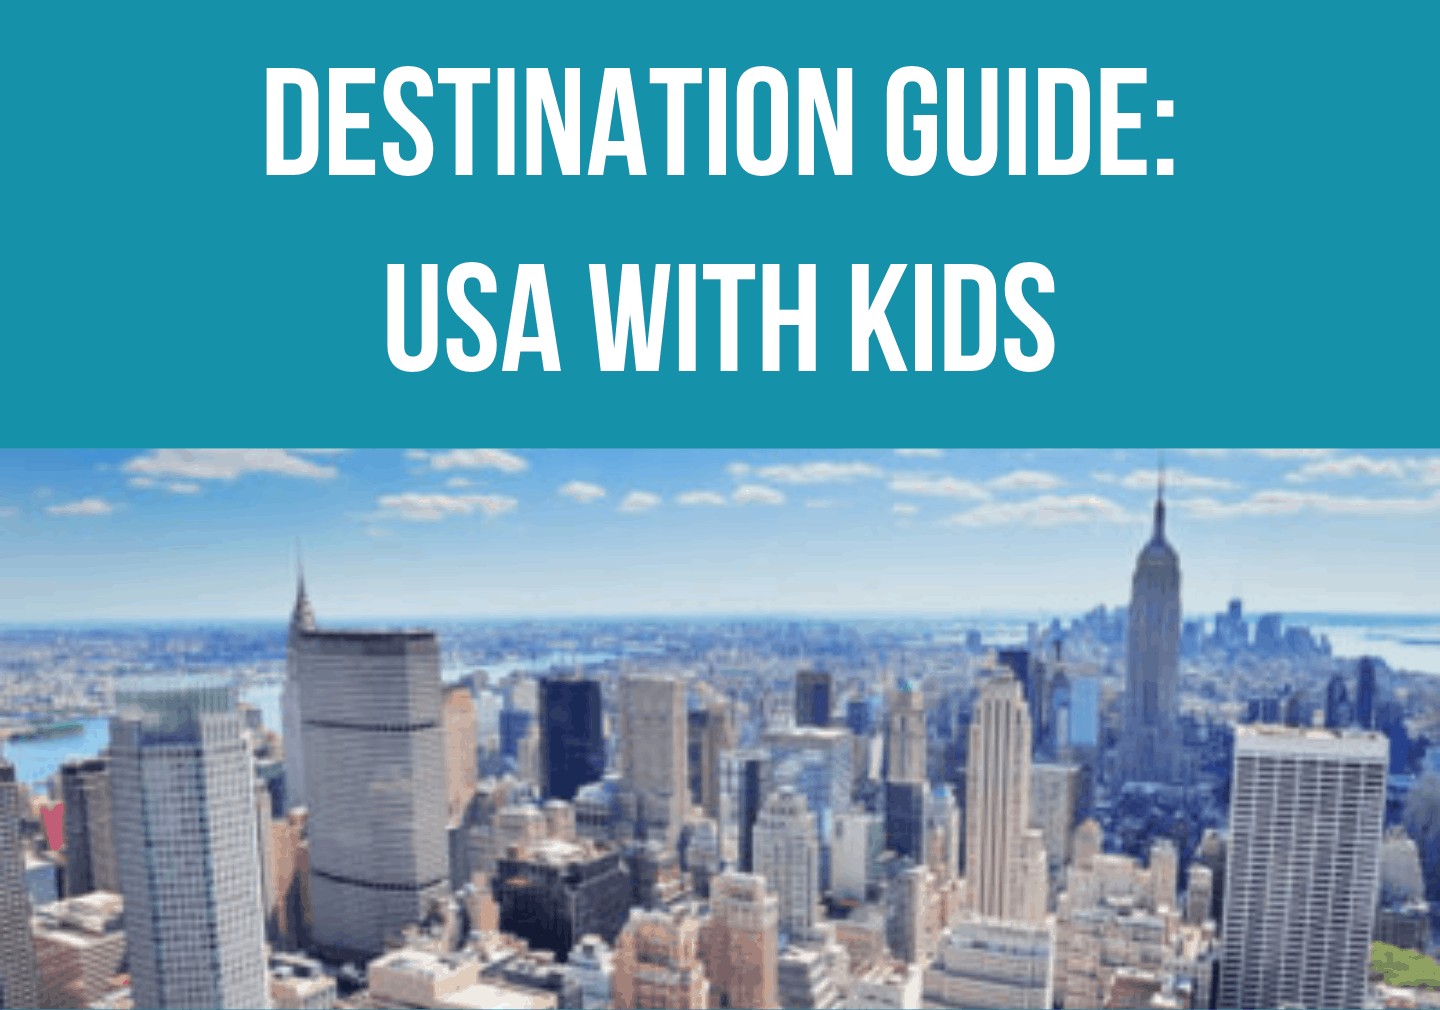 Family Travel Resources